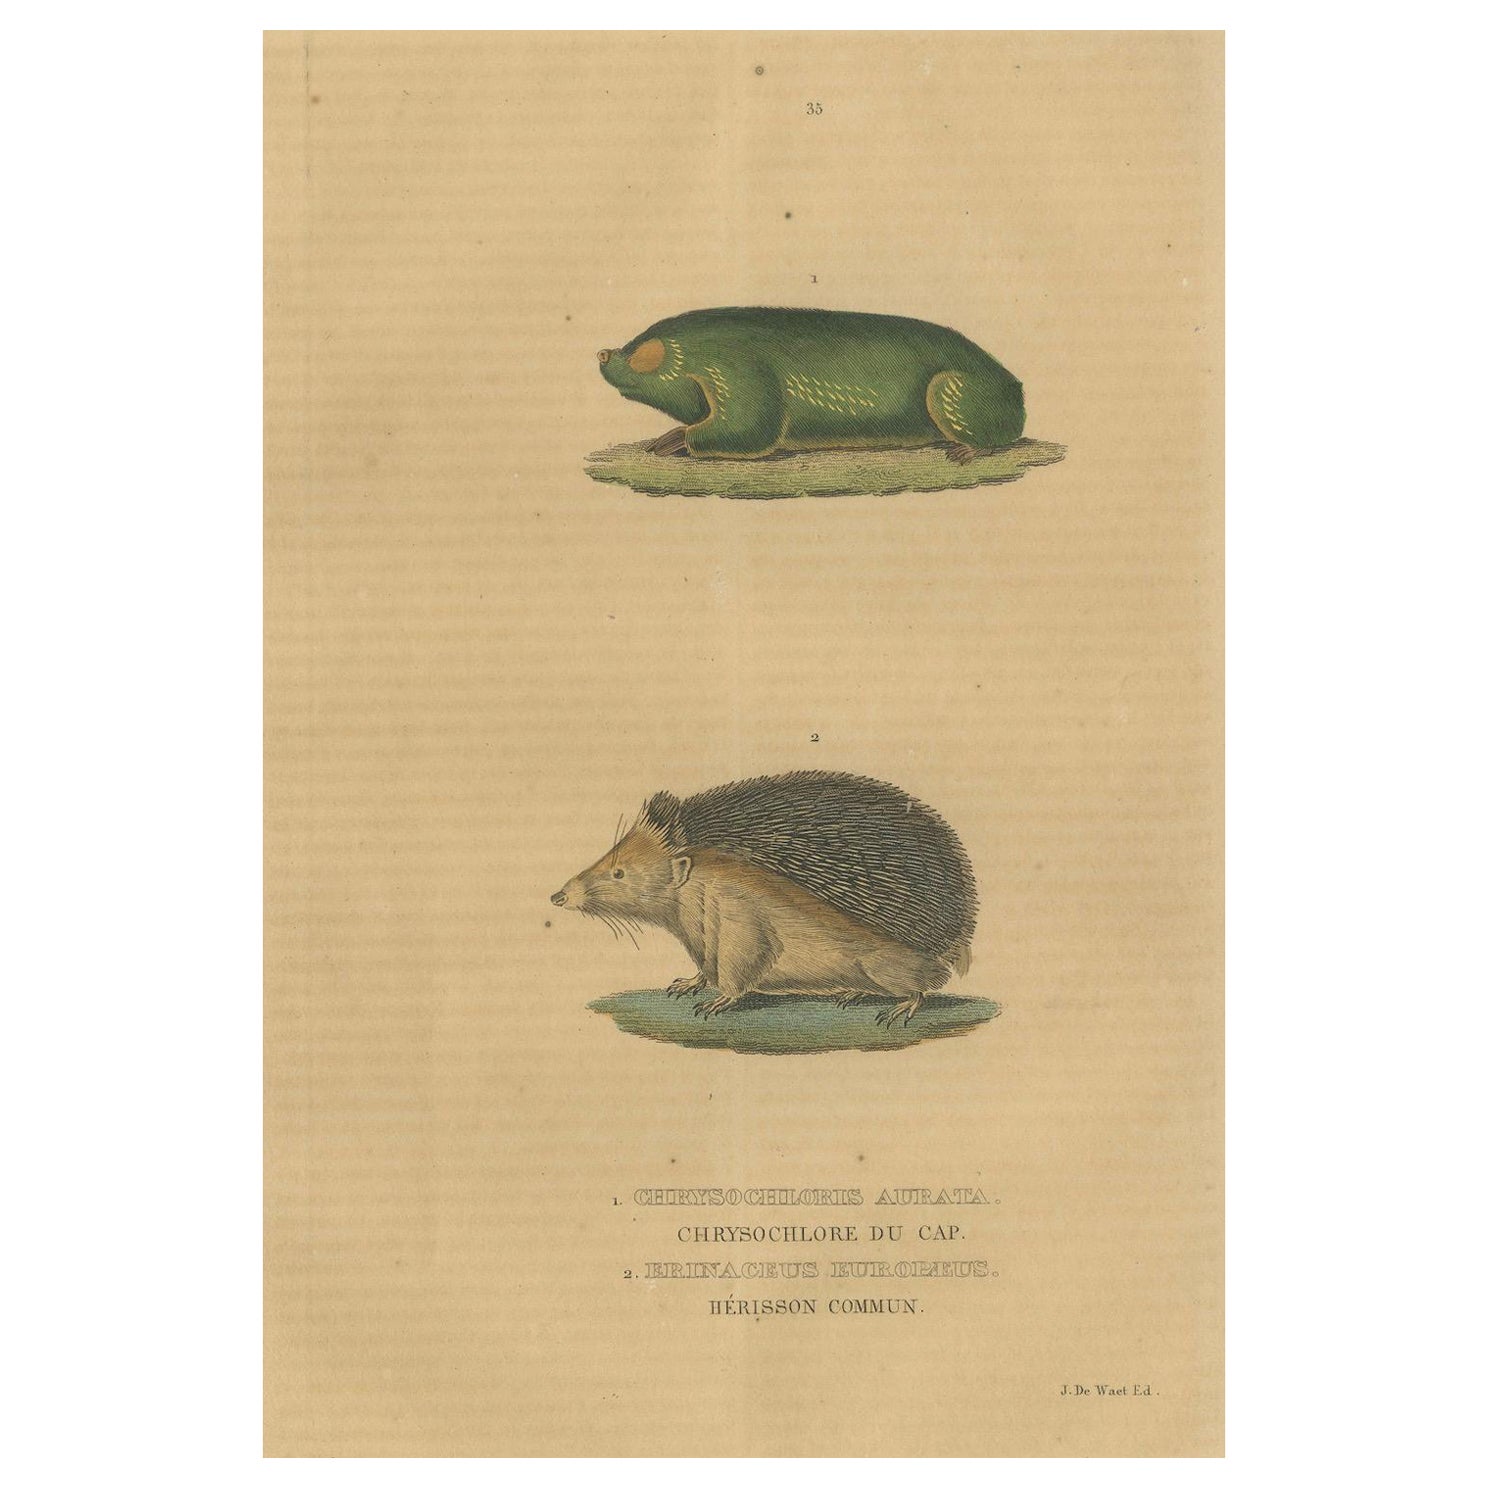 Subterranean Marvels: The Cape Golden Mole and the Common Hedgehog, 1845